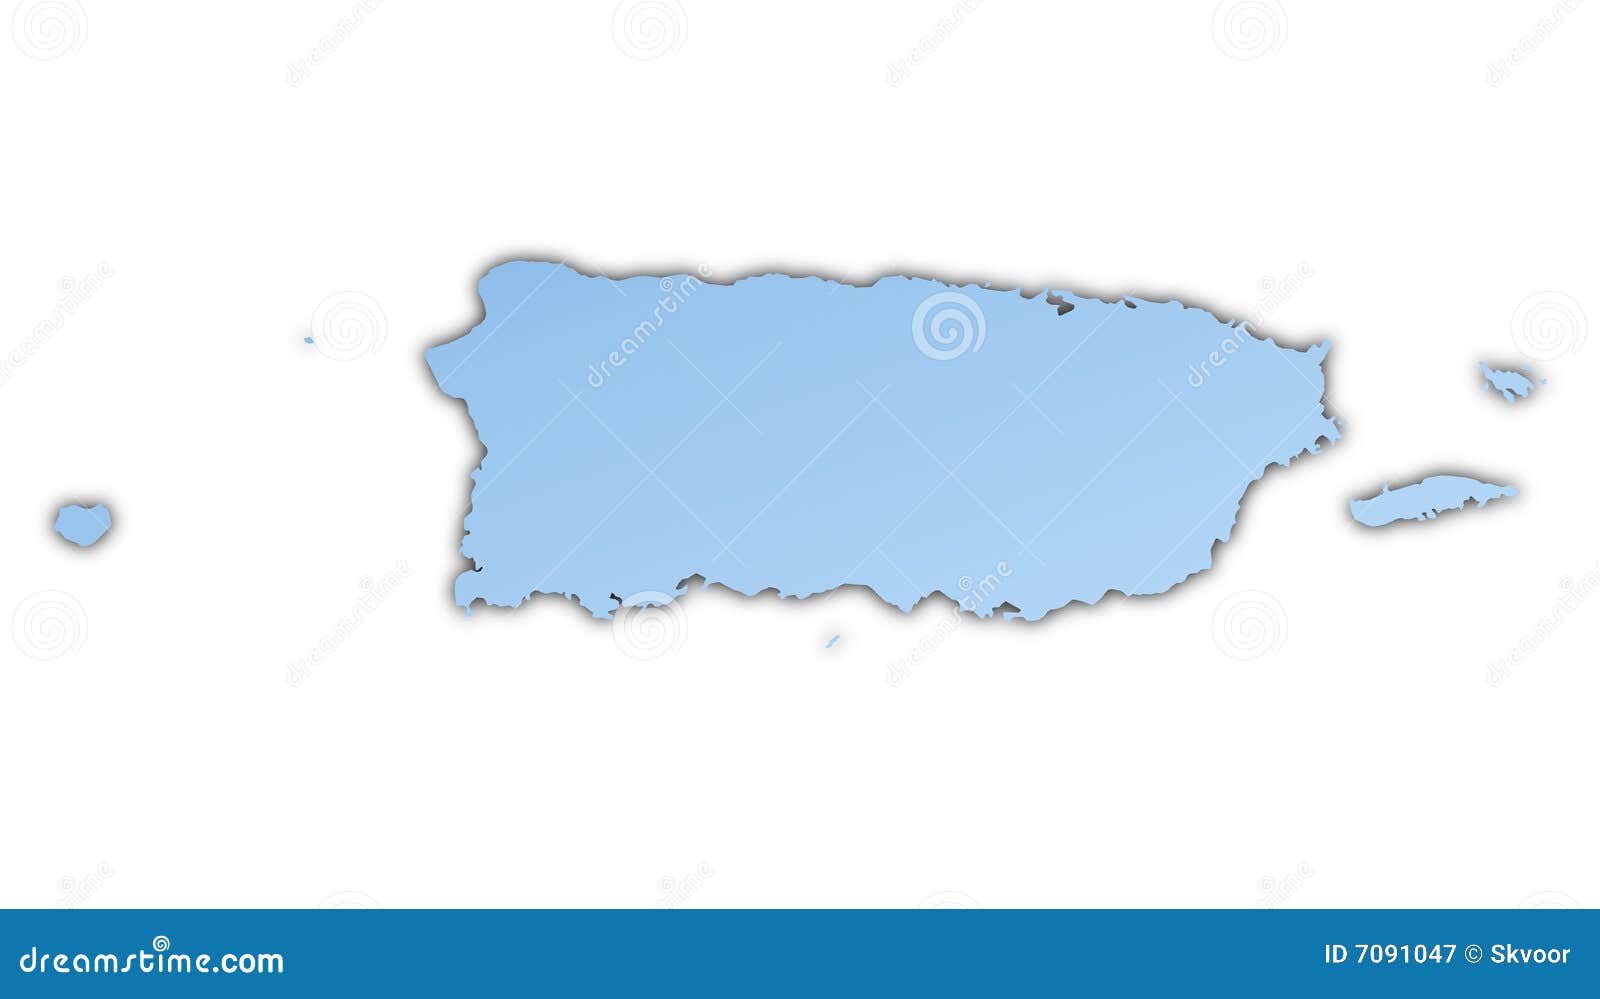 free clipart map of puerto rico - photo #17